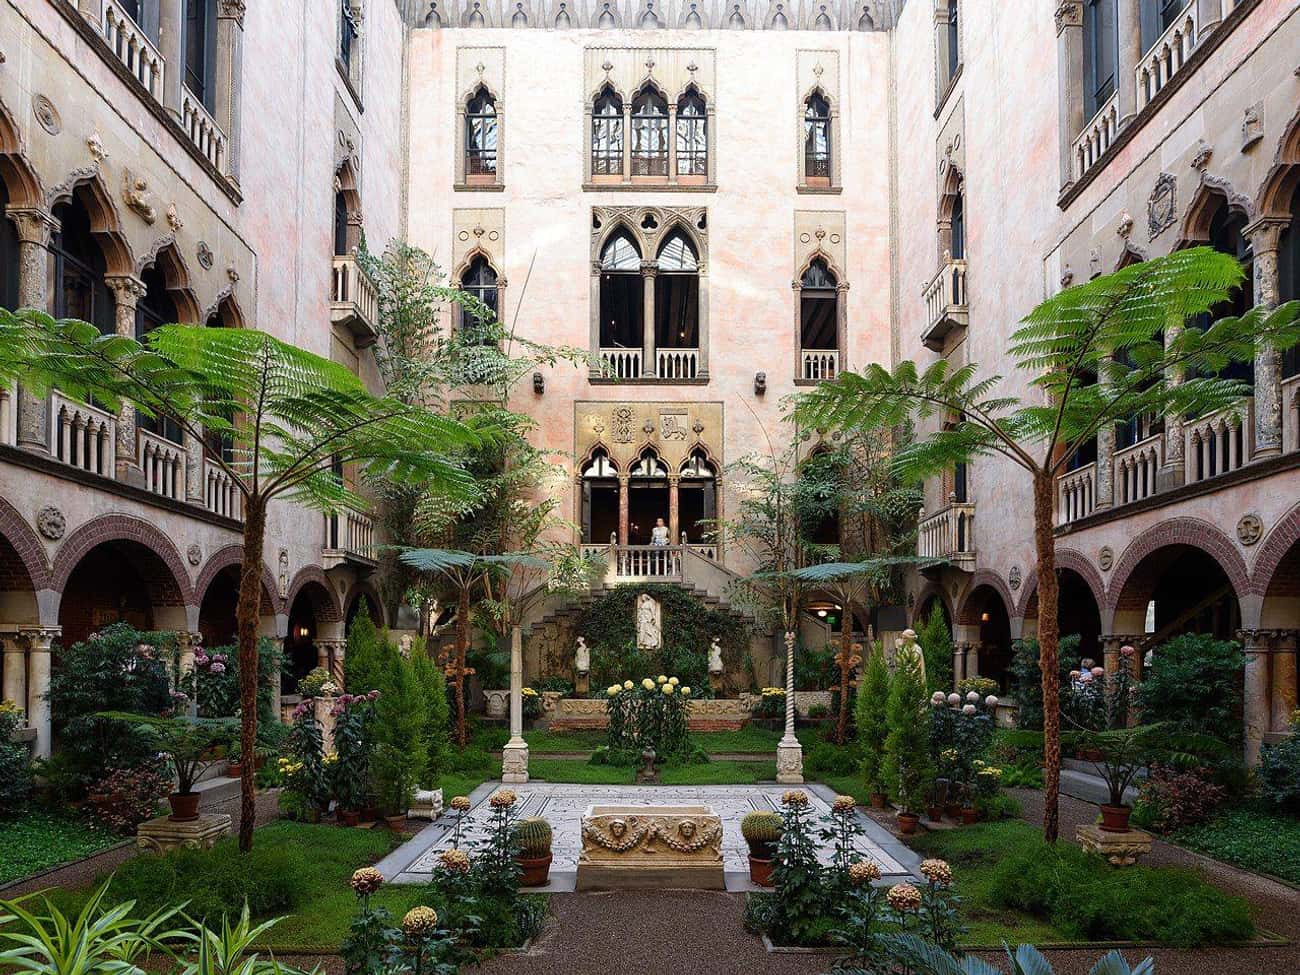 Posing As Guards, Art Thieves Broke Into Boston's Isabella Stewart Gardner Museum And Stole $500 Million Worth Of Art